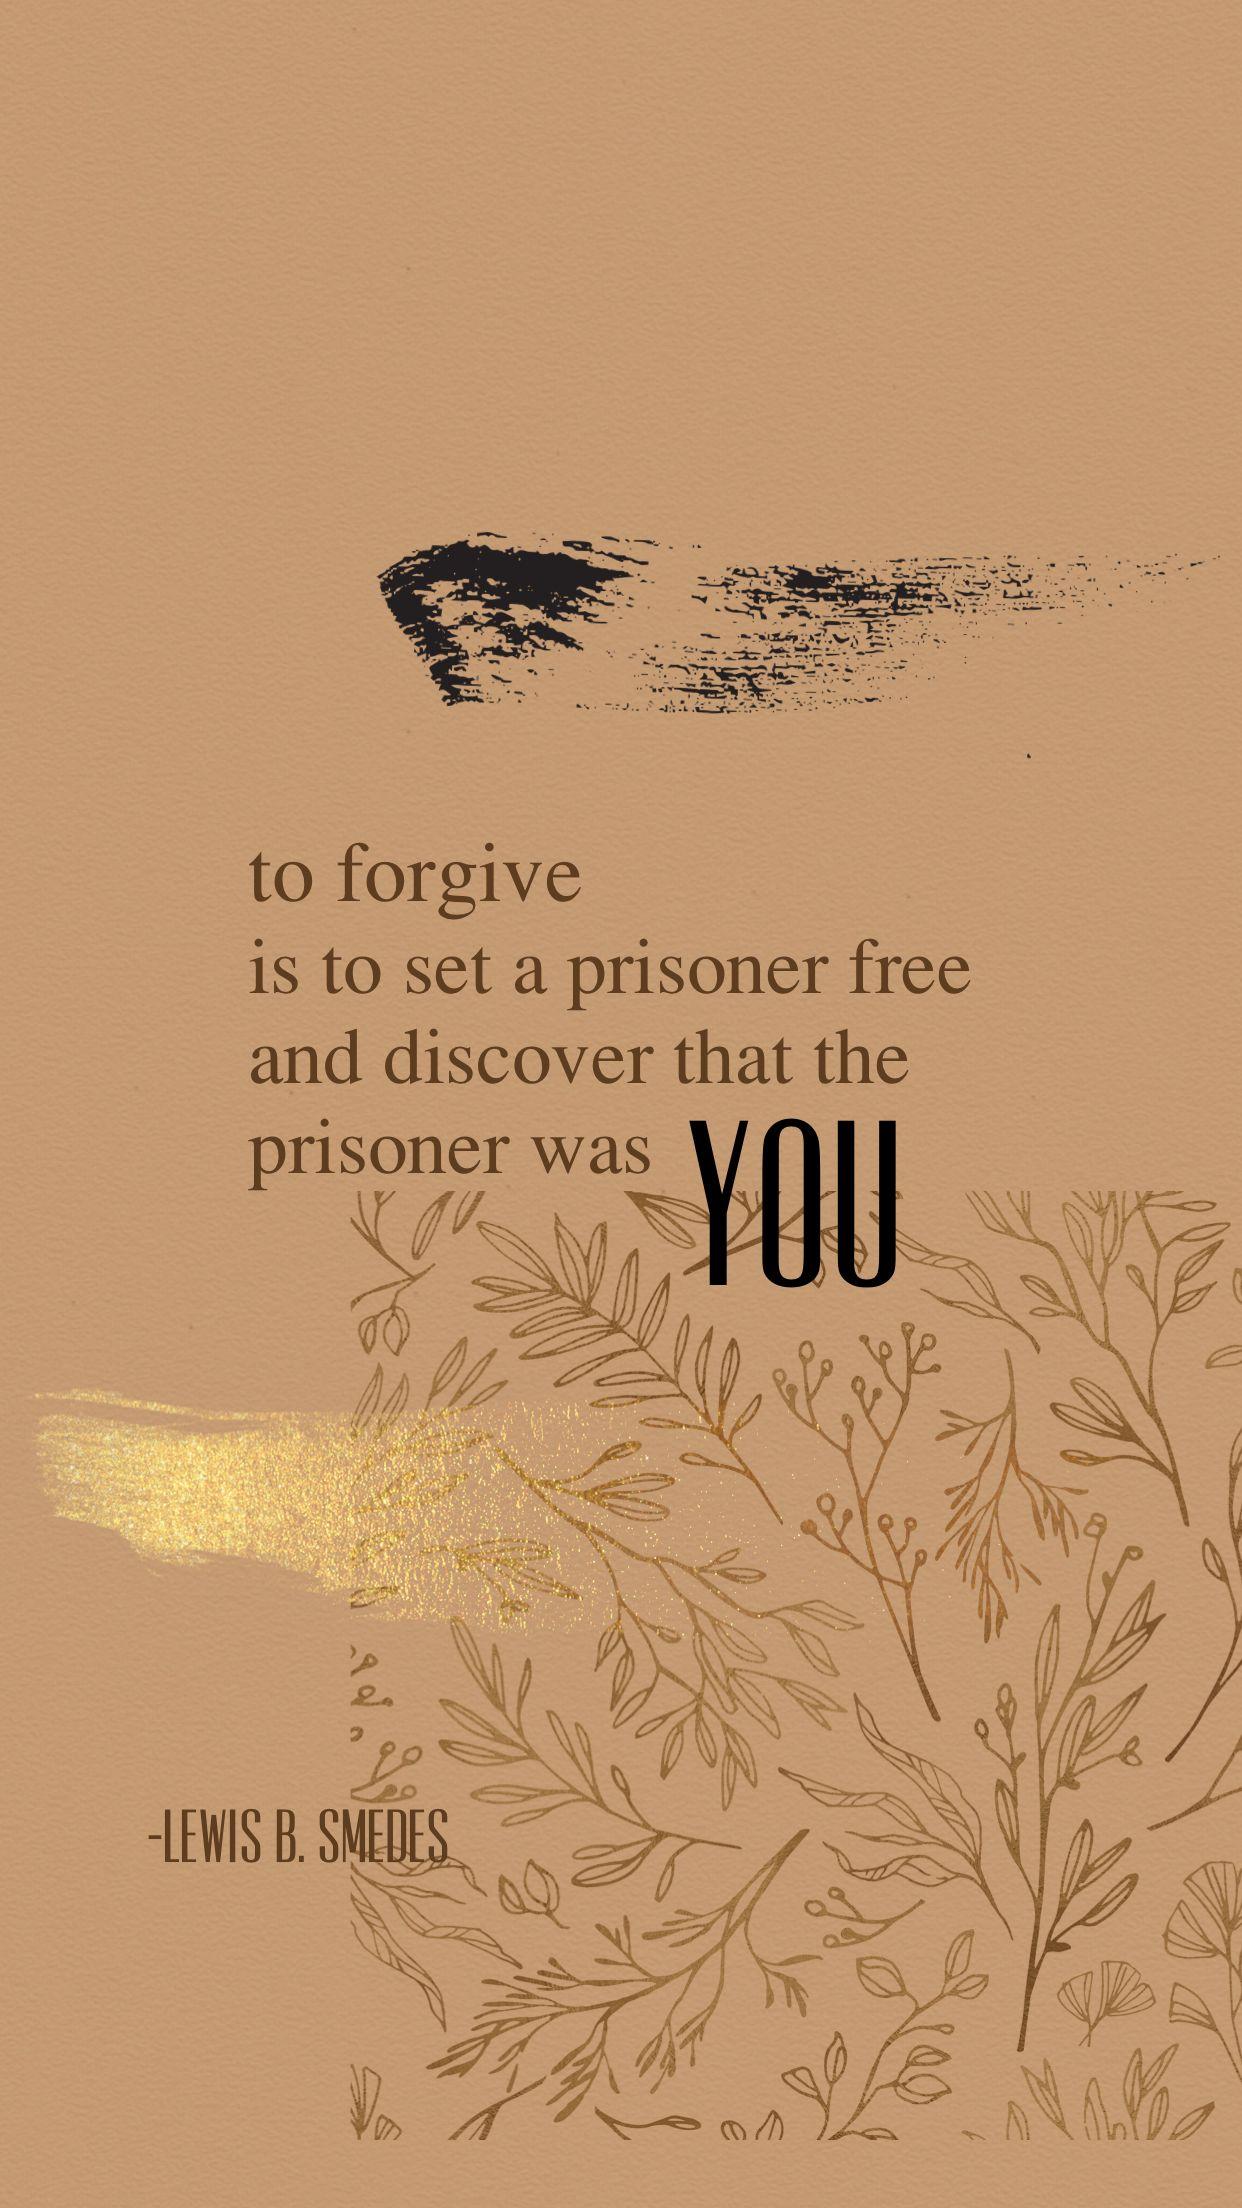 Forgive To Forget IPhone Wallpaper HD IPhone Wallpapers Wallpaper Download   MOONAZ